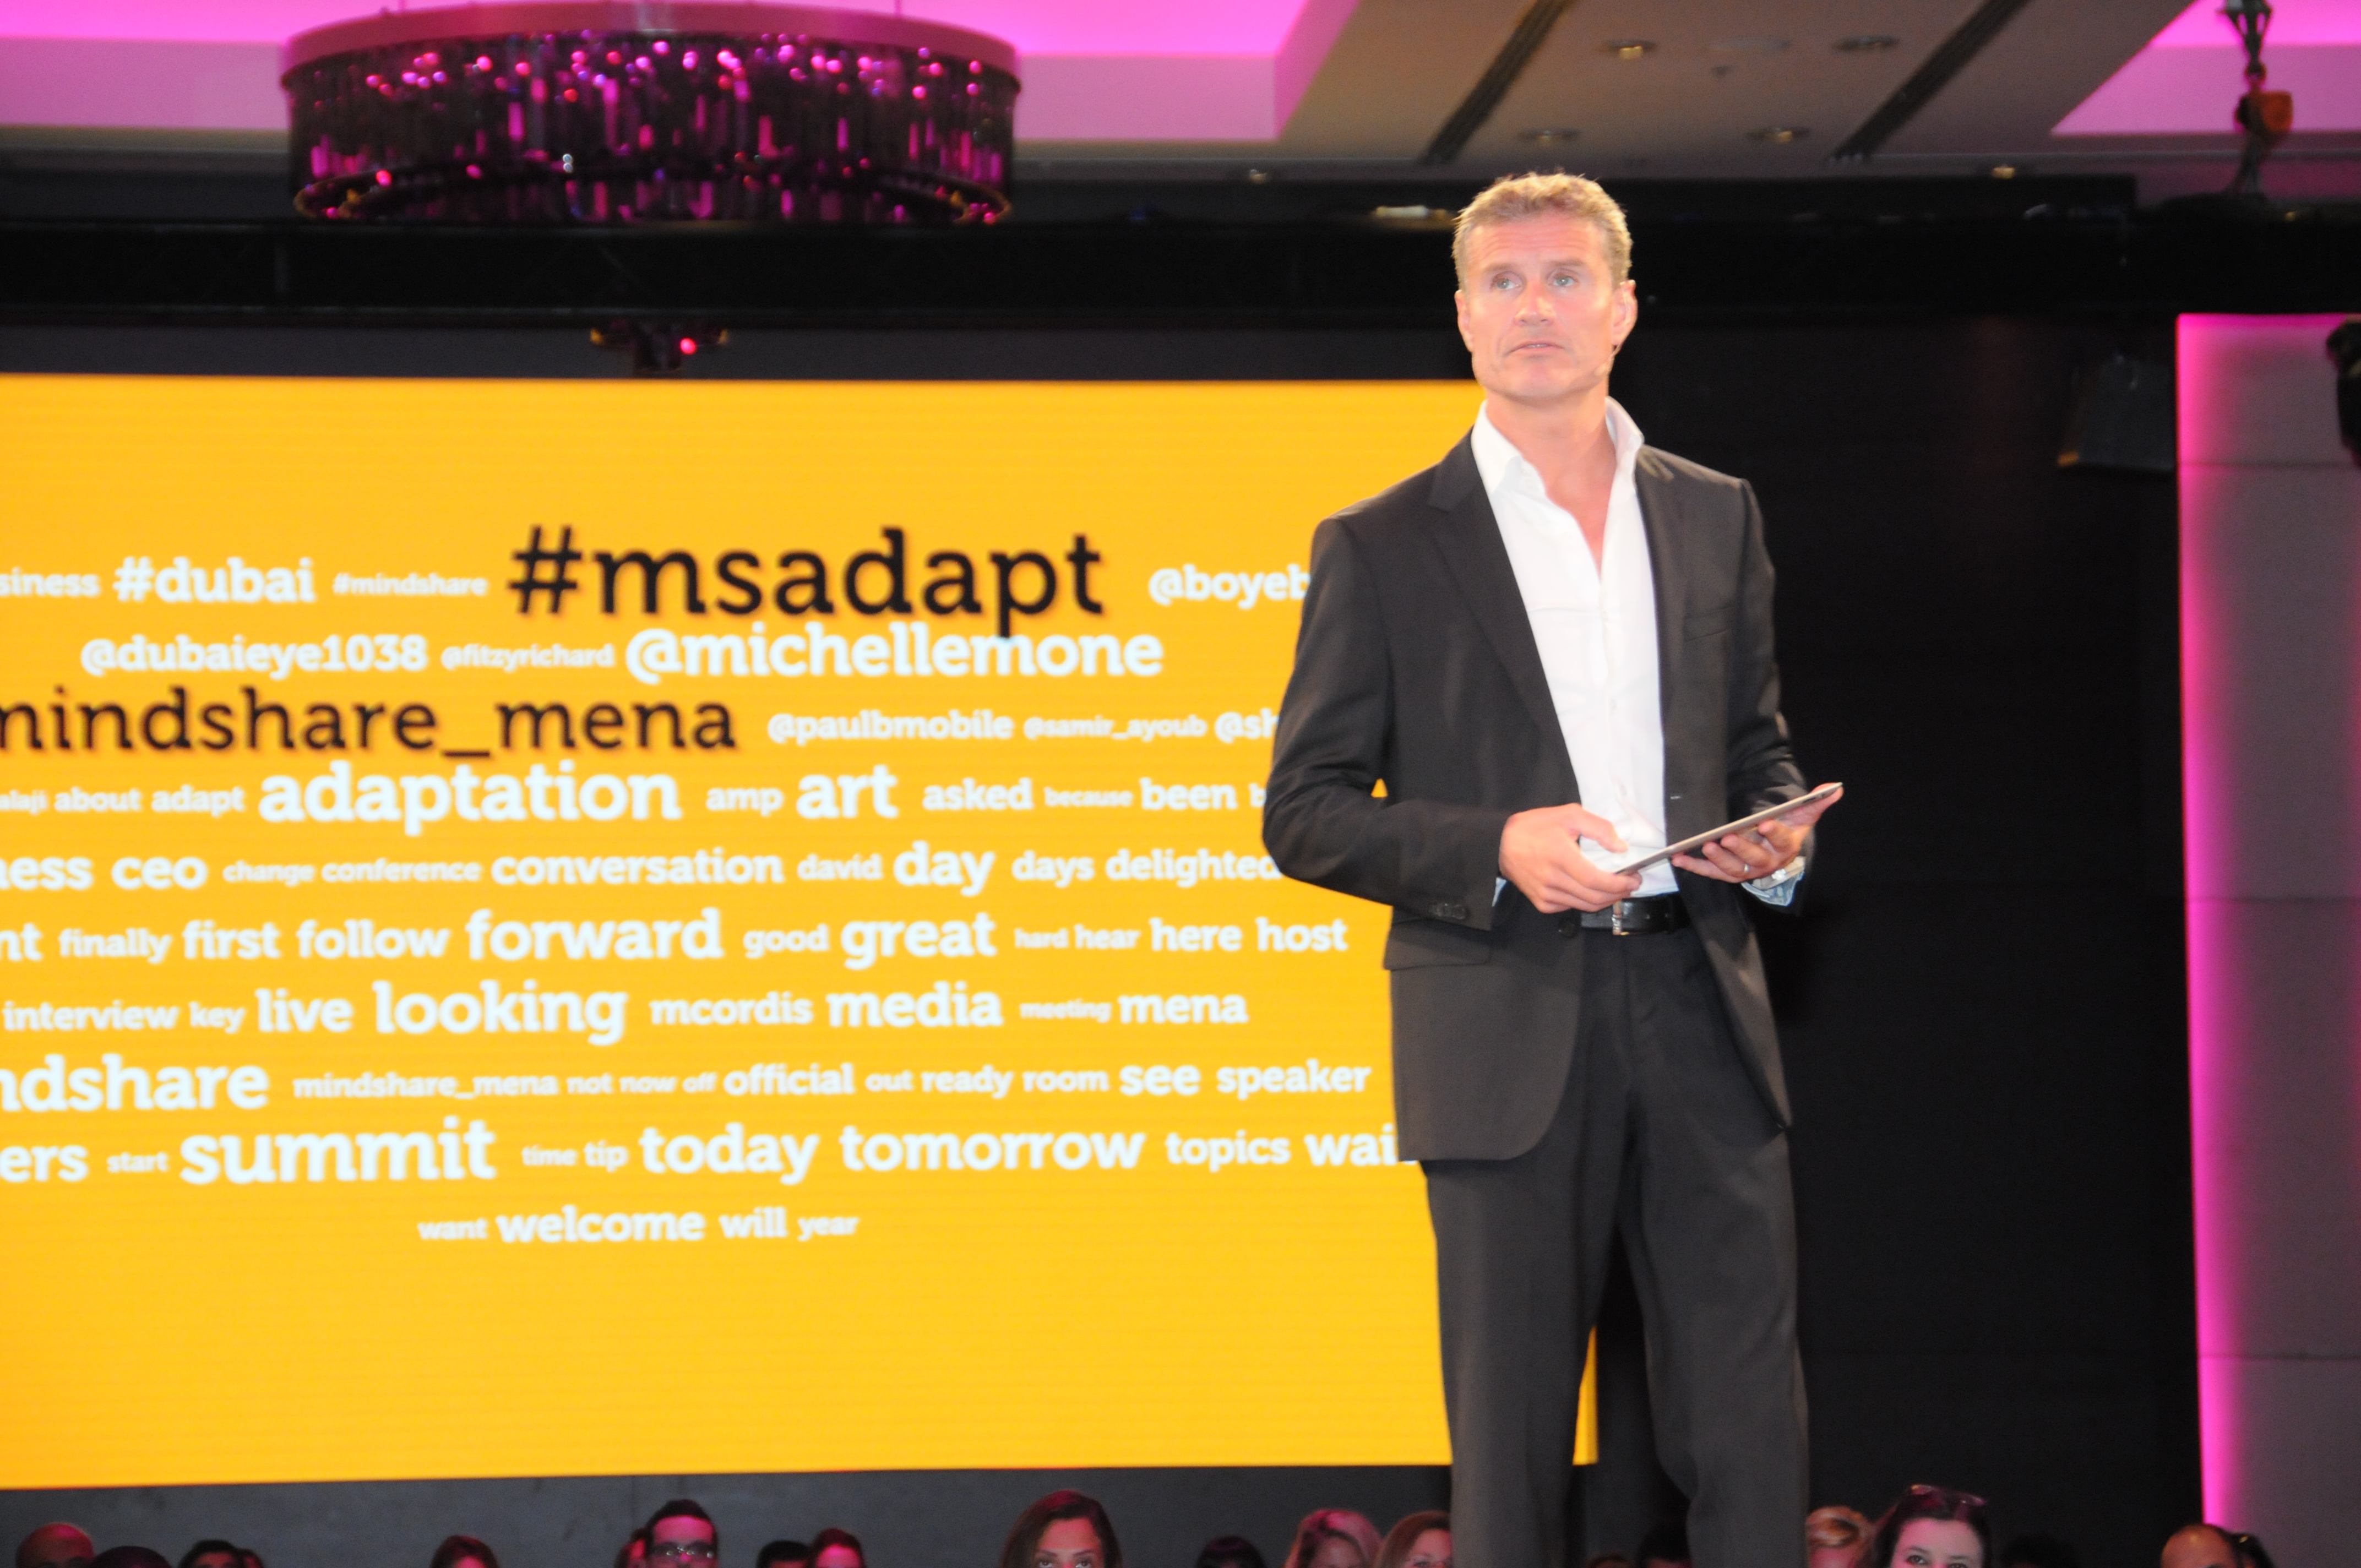 Mindshare’s “Art of Adaptation” takes place in Dubai